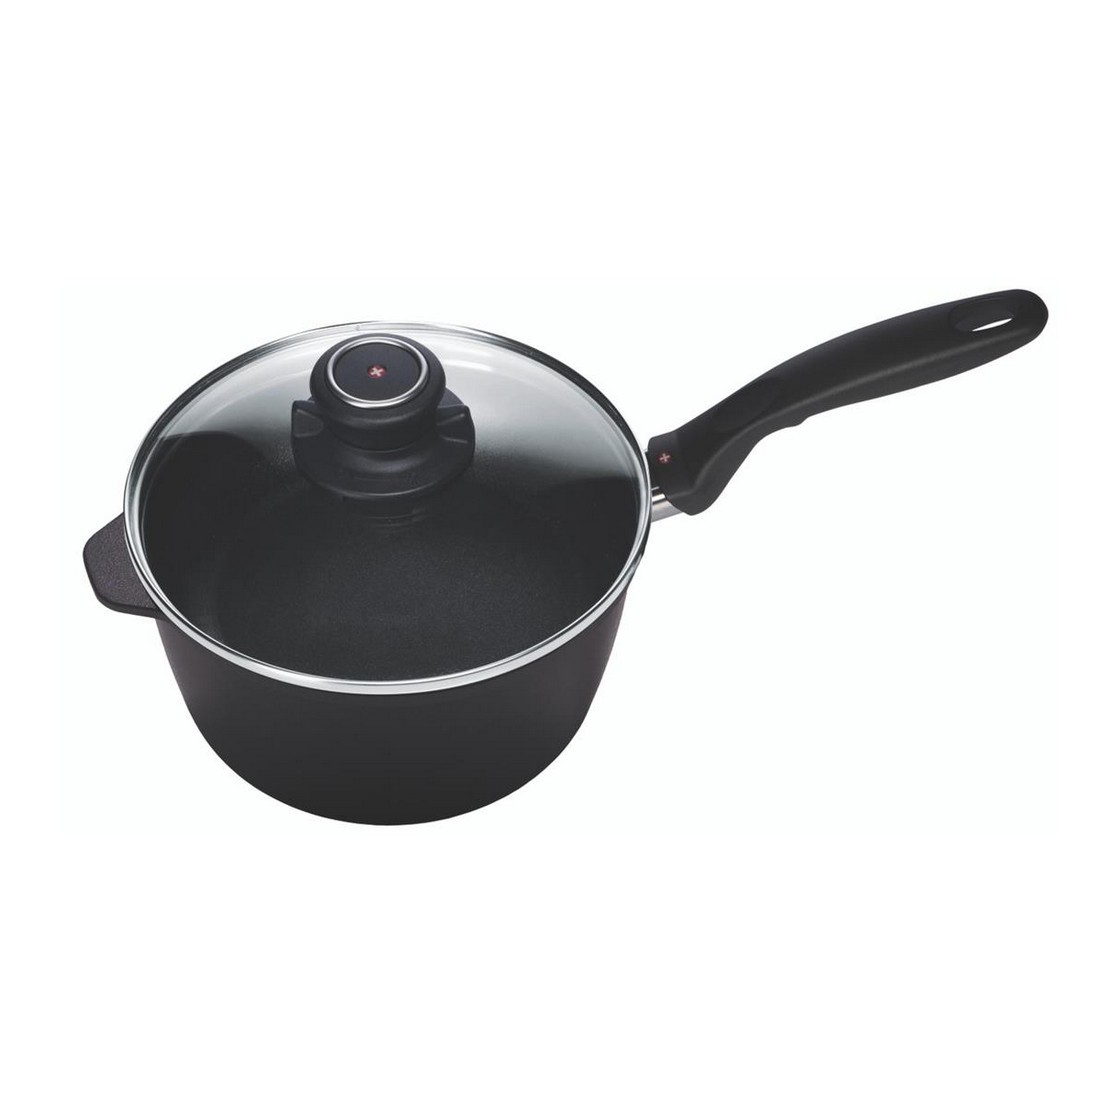 xd 3 l non-stick saucepan with glass lid - induction